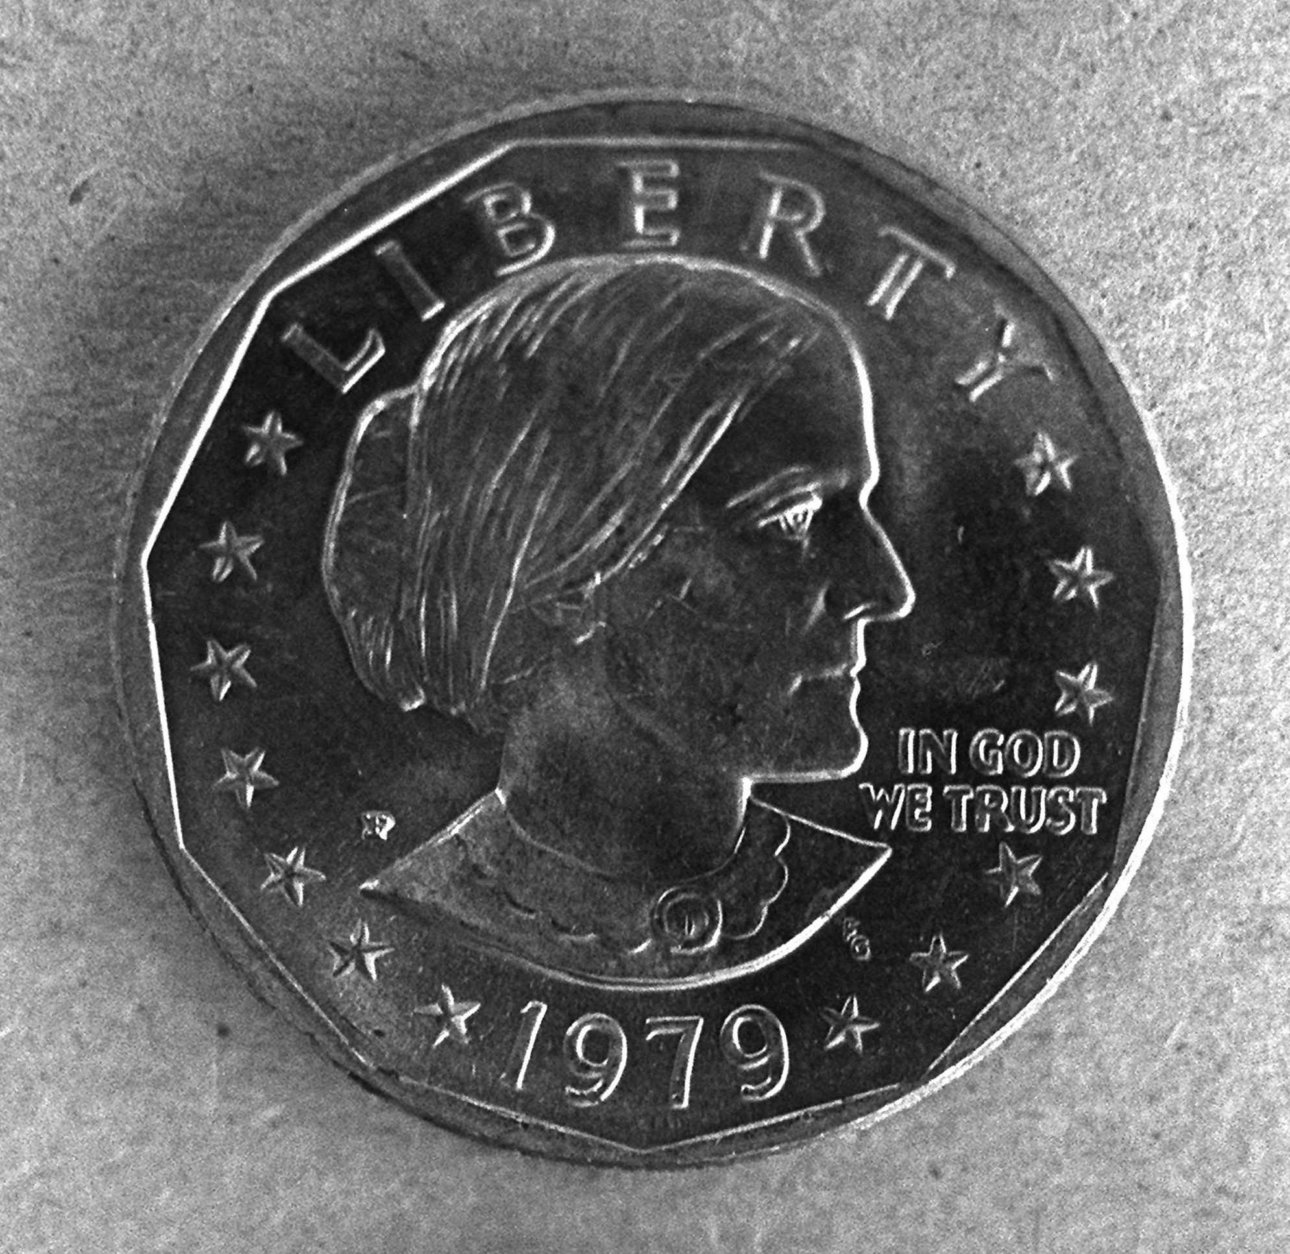 16 years after the government stopped minting the unpopular Susan B. Anthony dollar, seen in this 1979 file photo, stocks of the coin are running low and the Clinton administration says it's open to considering a new dollar coin. "As the Susan B. Anthonys run out, we may very well need to have new dollar coins,'' Treasury Secretary Robert Rubin said, Thursday, March 6, 1997. (AP Photo/Gene Puskar)